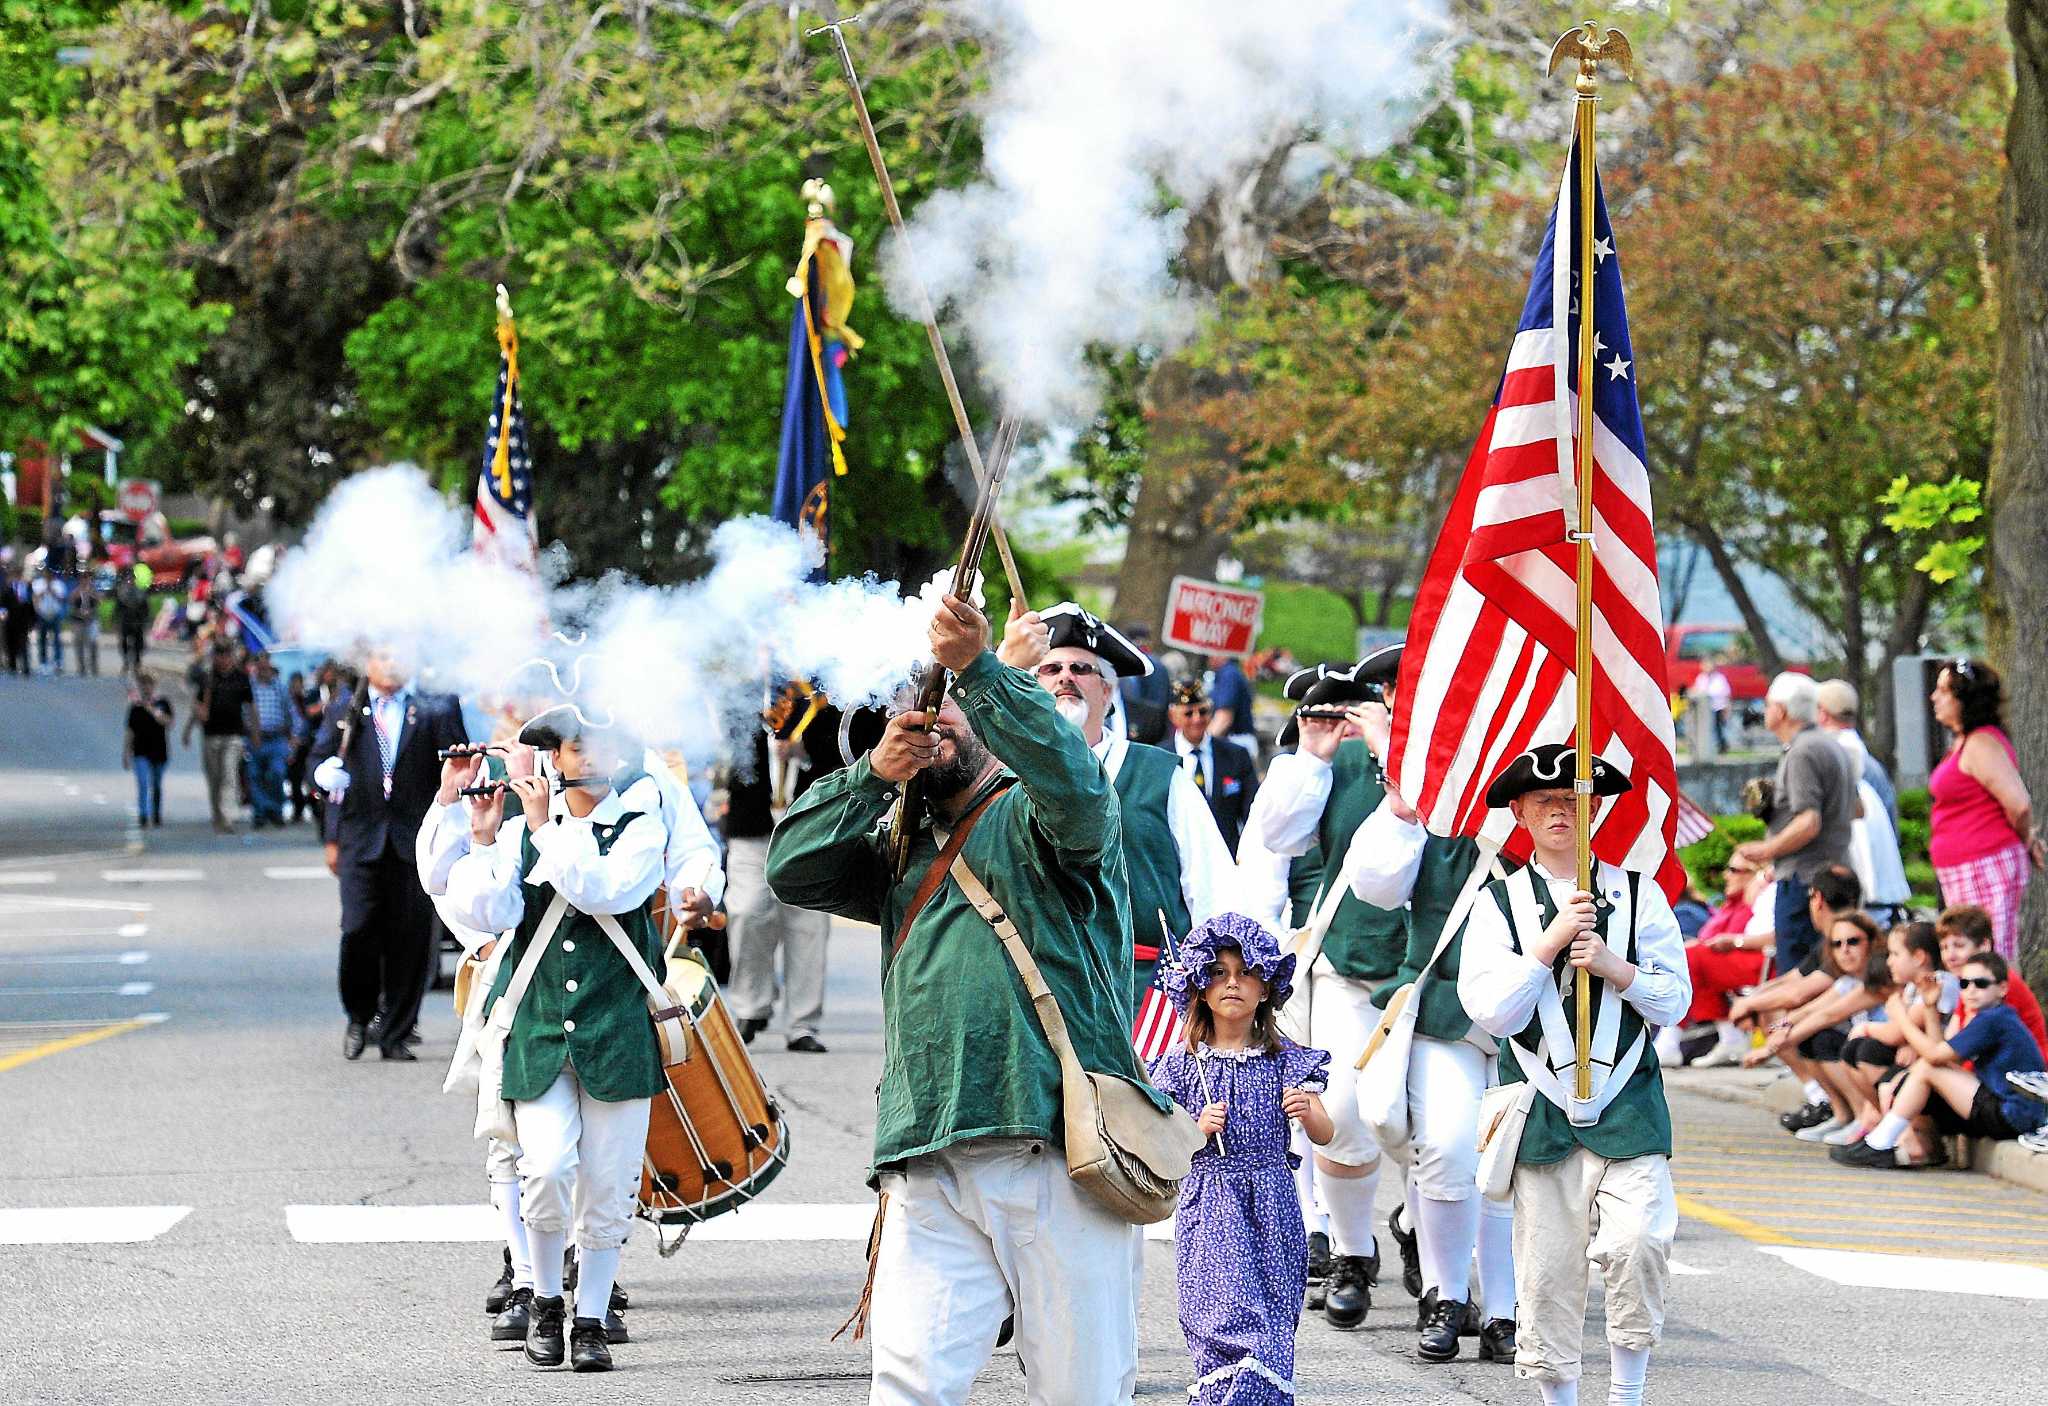 Milford Memorial Day parade planned for May 27